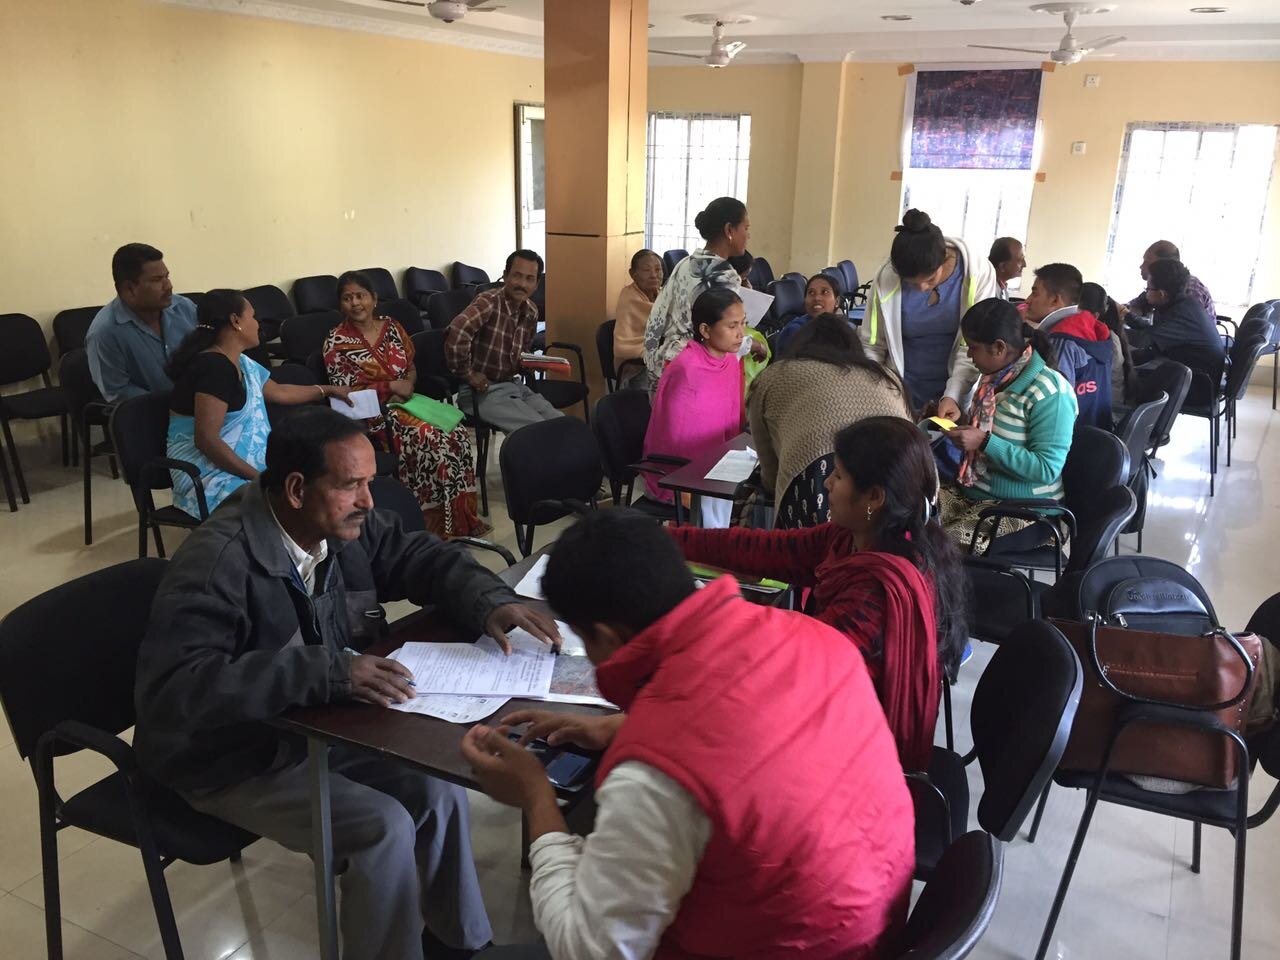   Pilot demand survey for PMAY(U) Assam   Successfully enumerated 3000+ households under the PMAY(U) demand survey in Morigaon, Assam, in strong adherence with PMAY(U) Mission guidelines.   Read More  